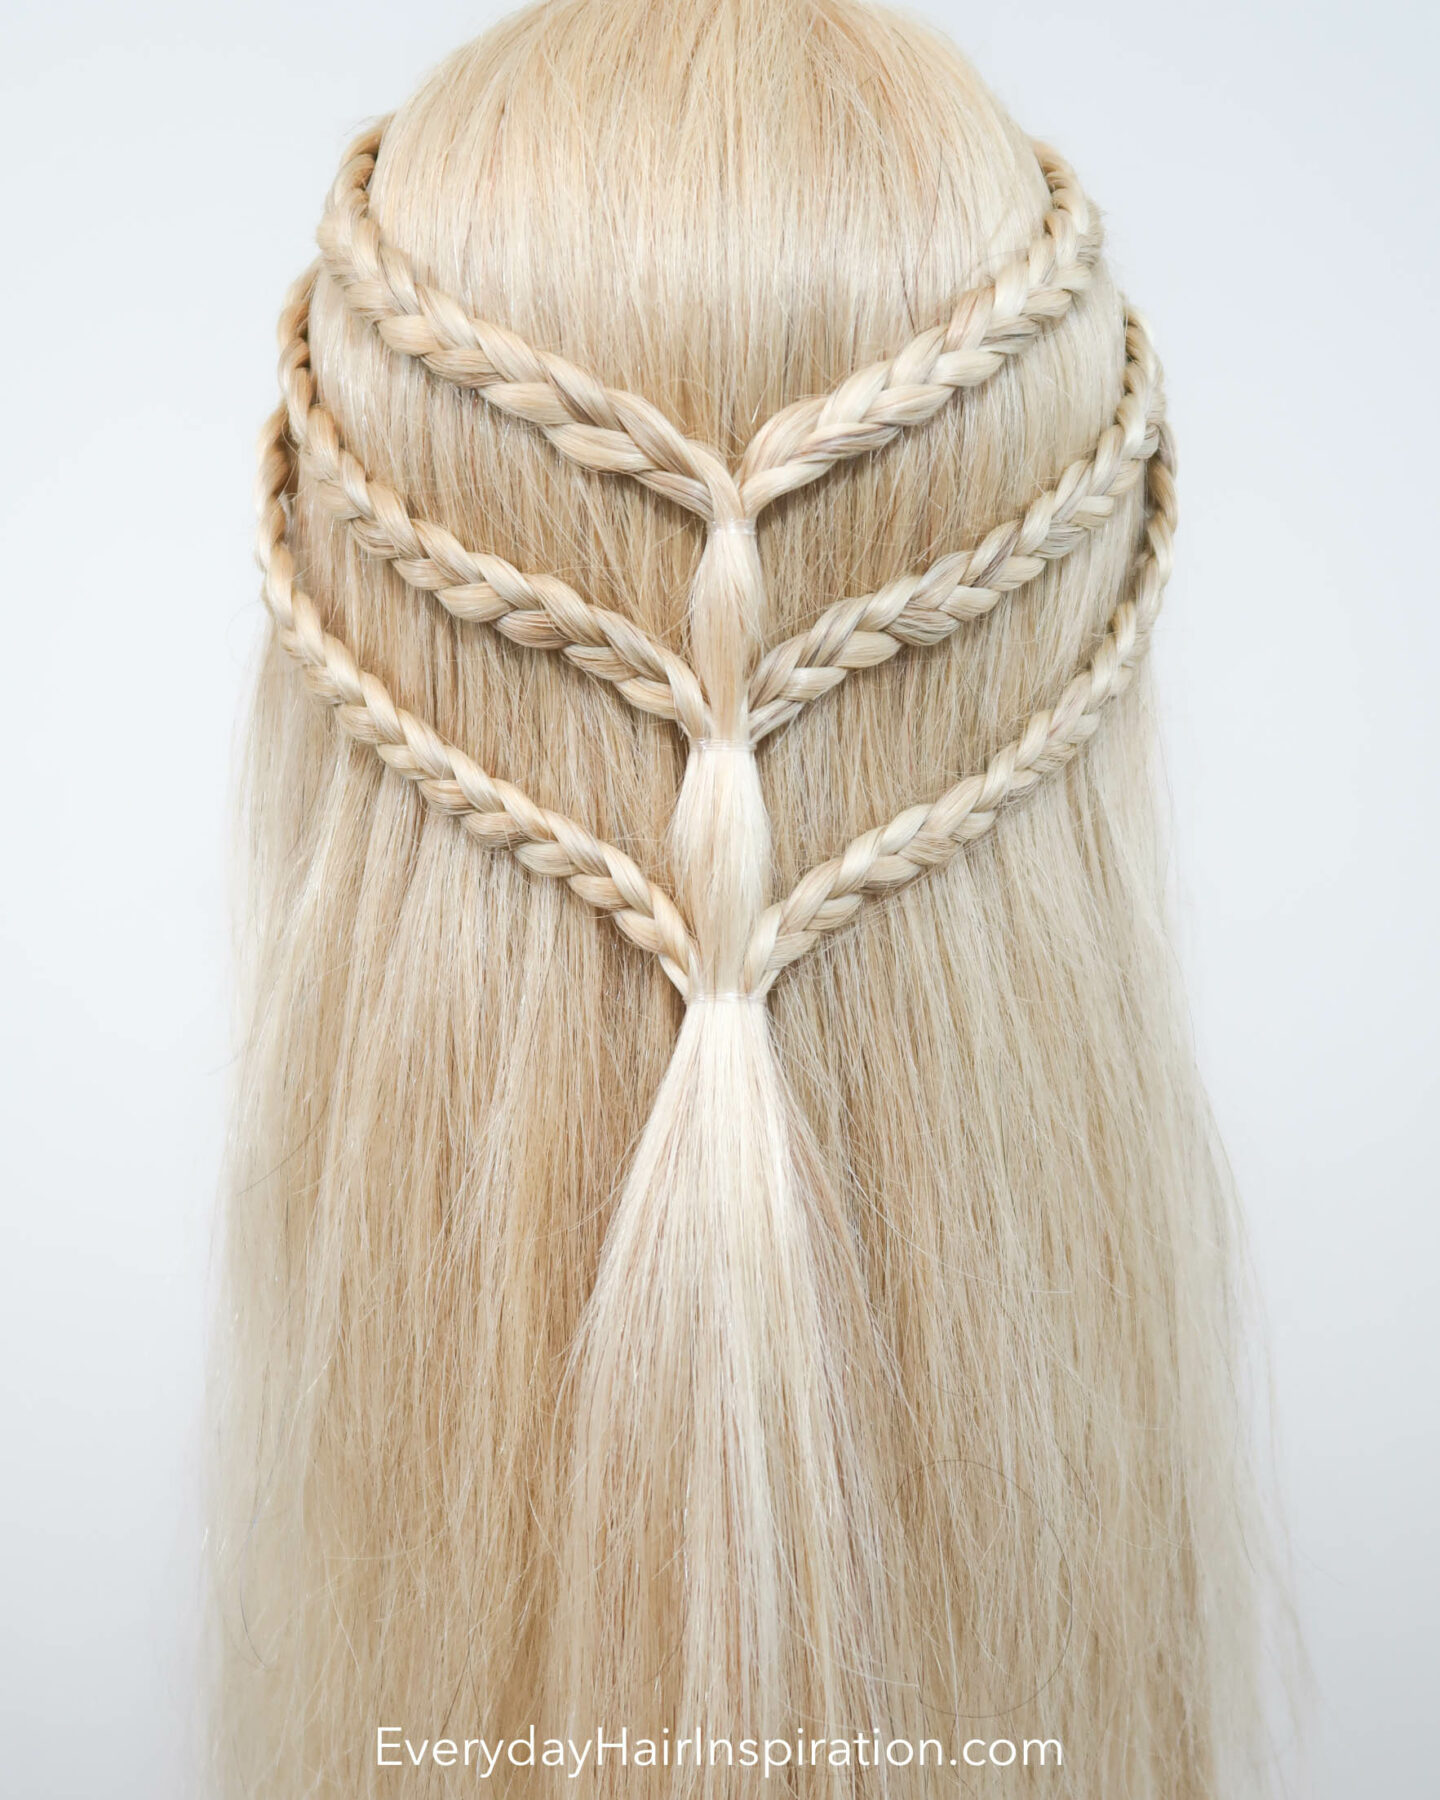 Blonde hairdresser doll with a triple braided half up half down hairstyle seen from the back